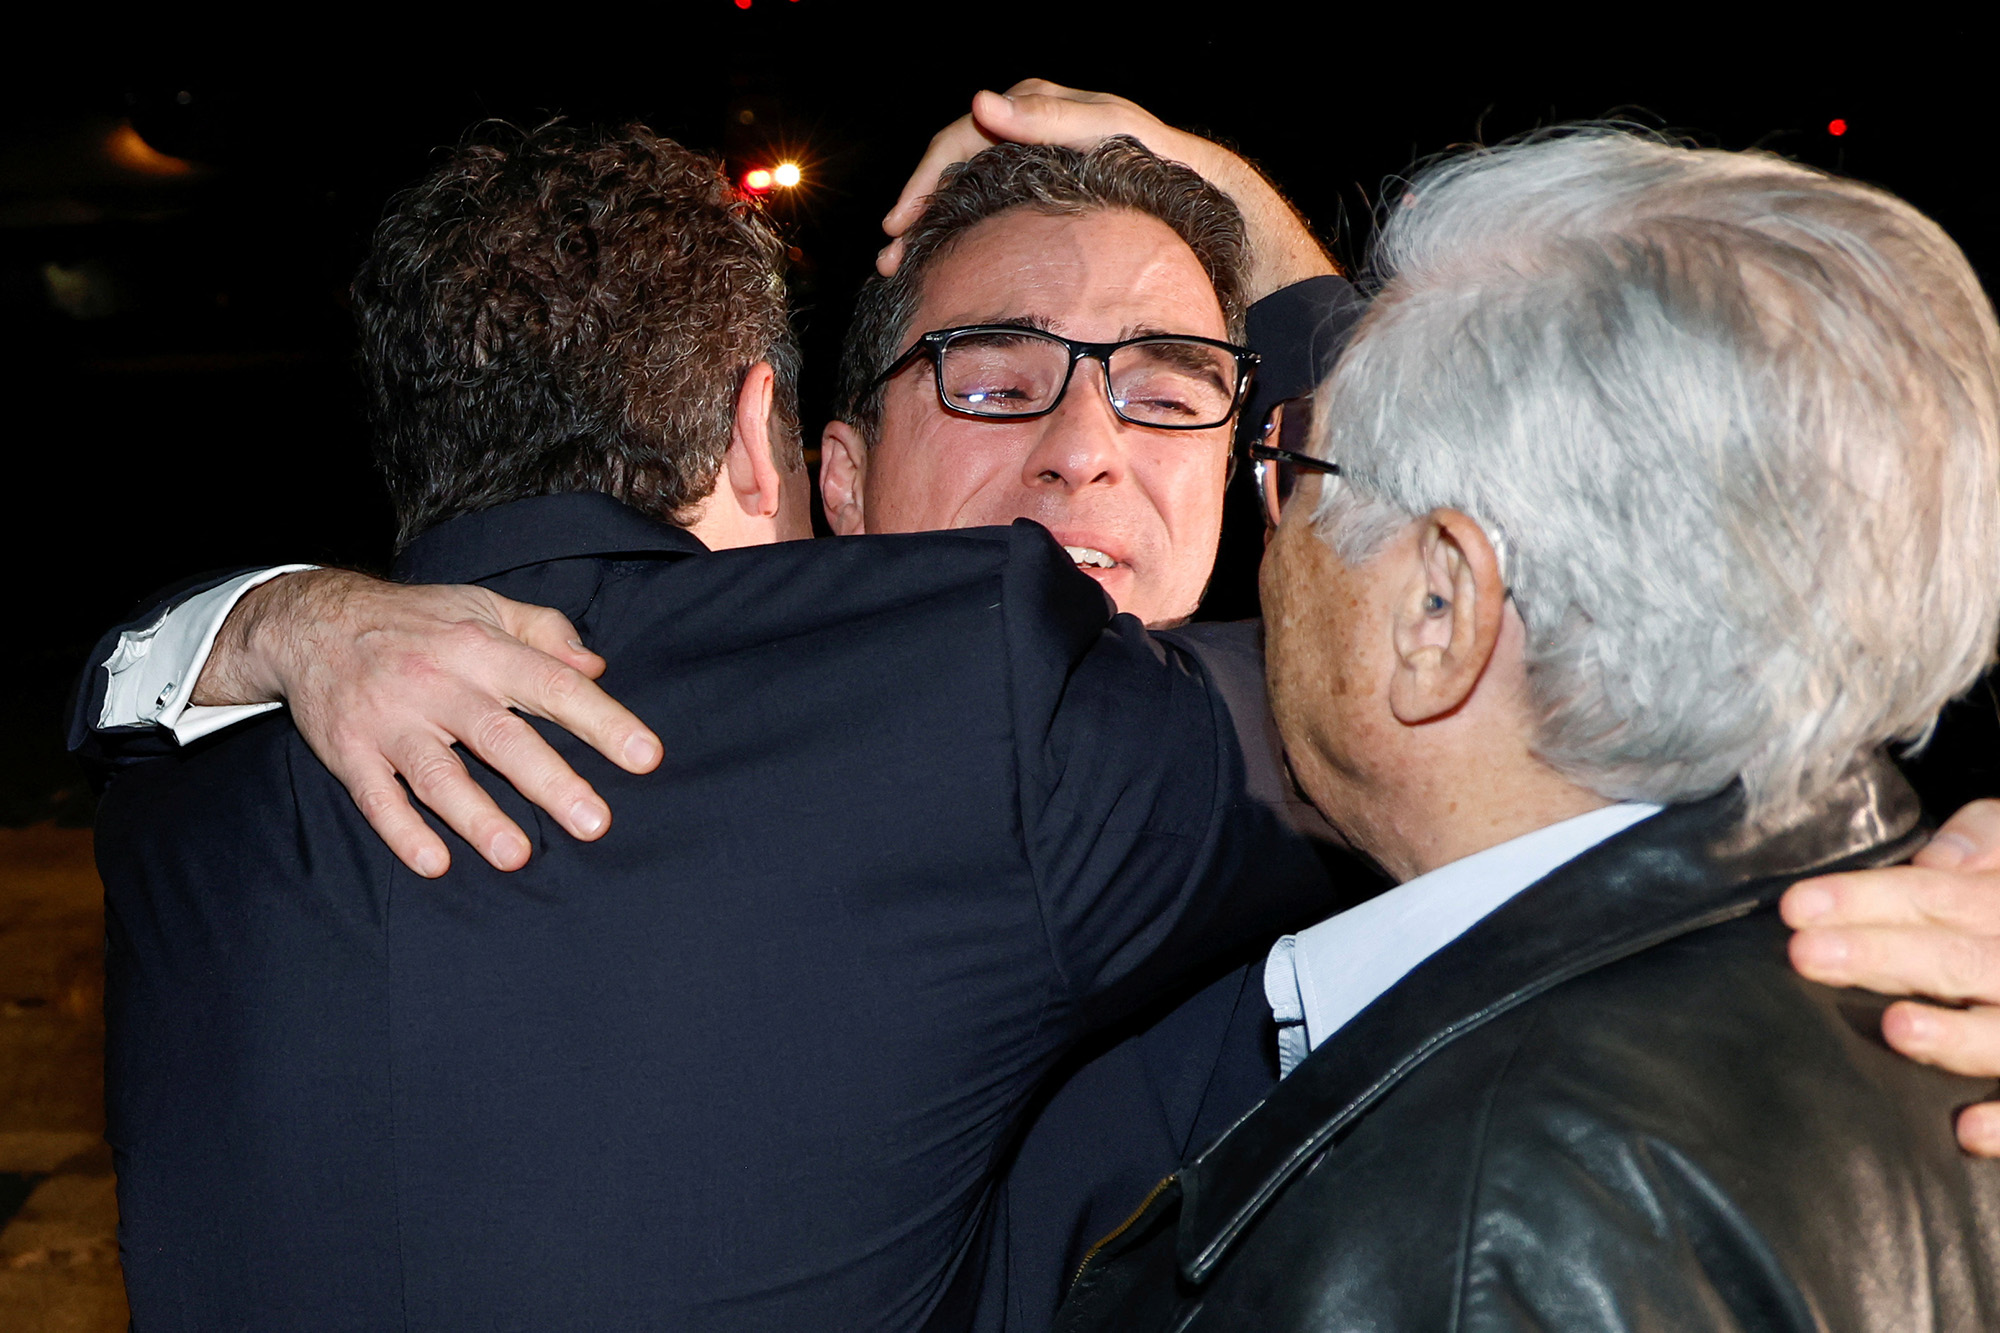 Family members embrace freed American Siamak Namazi after he and four fellow detainees were released in a prisoner swap deal between U.S and Iran and arrived at Davison Army Airfield at Fort Belvoir, Virginia, U.S., on September 19.